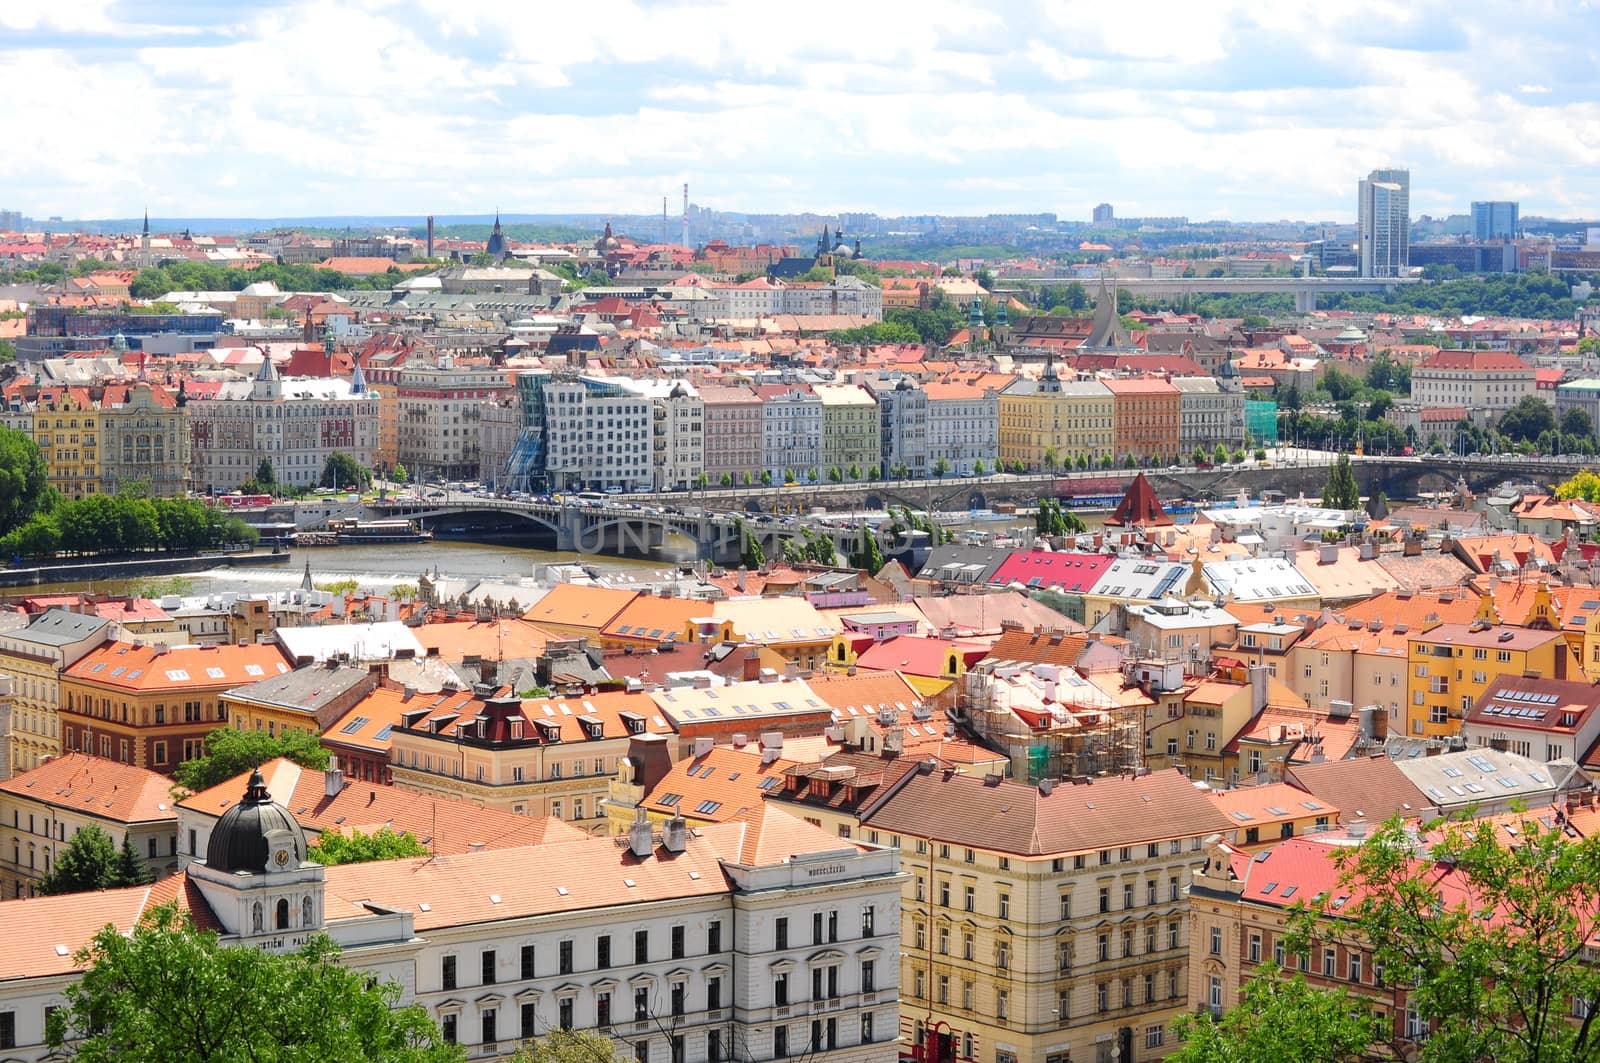 Panoramic view of Prague on a sunny day by AnnaNouvier